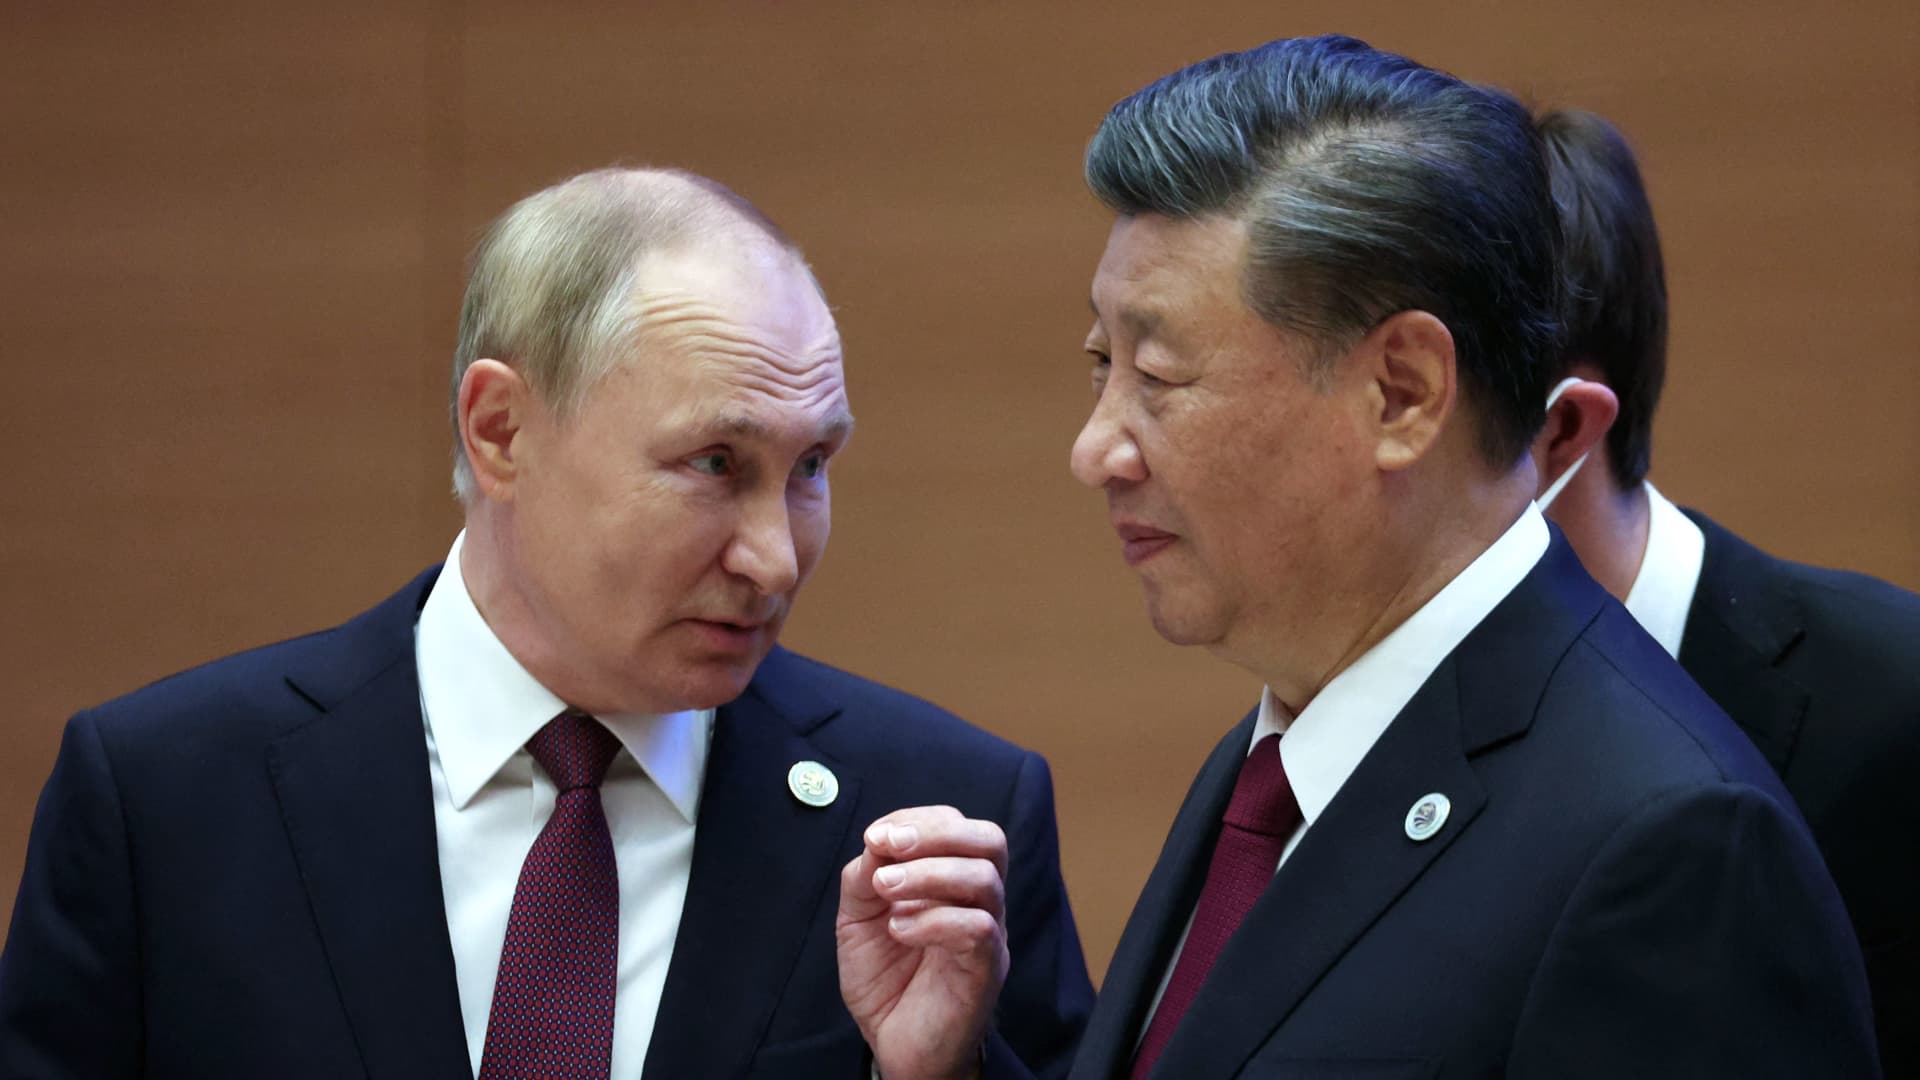 Russian President Vladimir Putin speaks to China's President Xi Jinping during the Shanghai Cooperation Organization leaders' summit in Samarkand on Sept. 16, 2022.